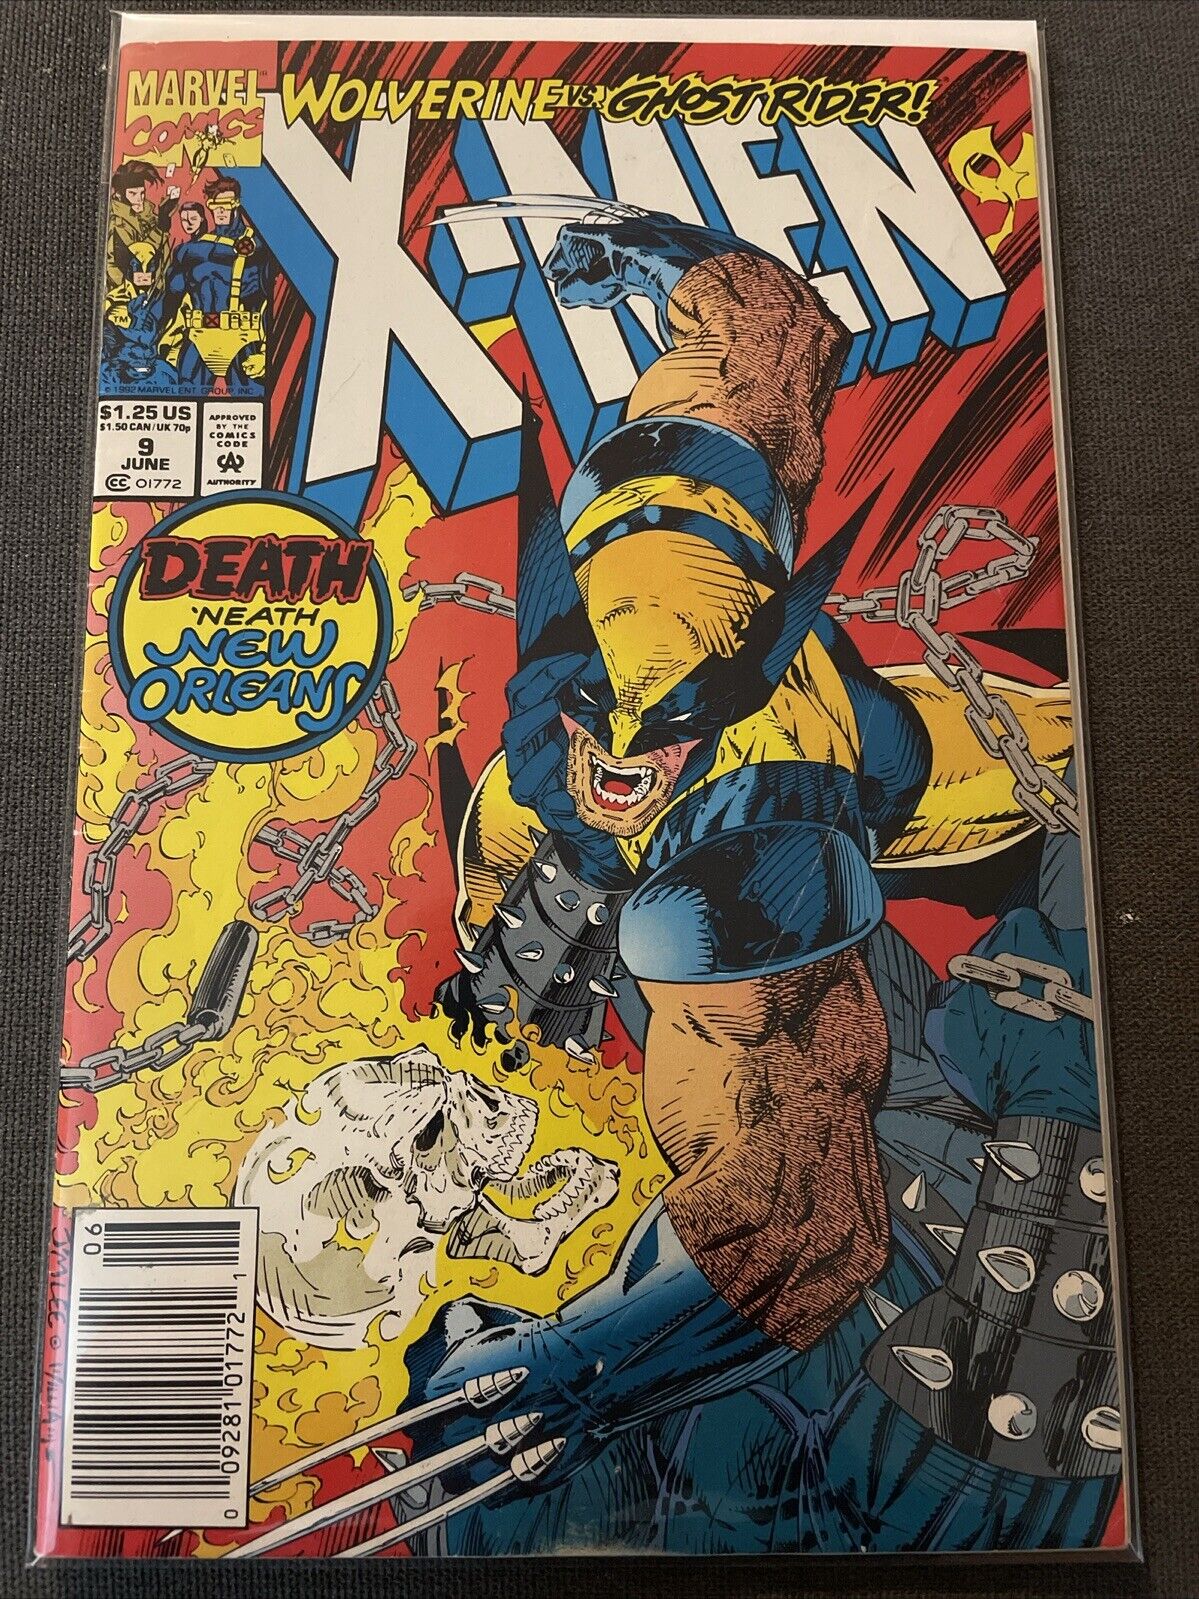 Marvel - X-MEN #9 (Good Condition) bagged and boarded